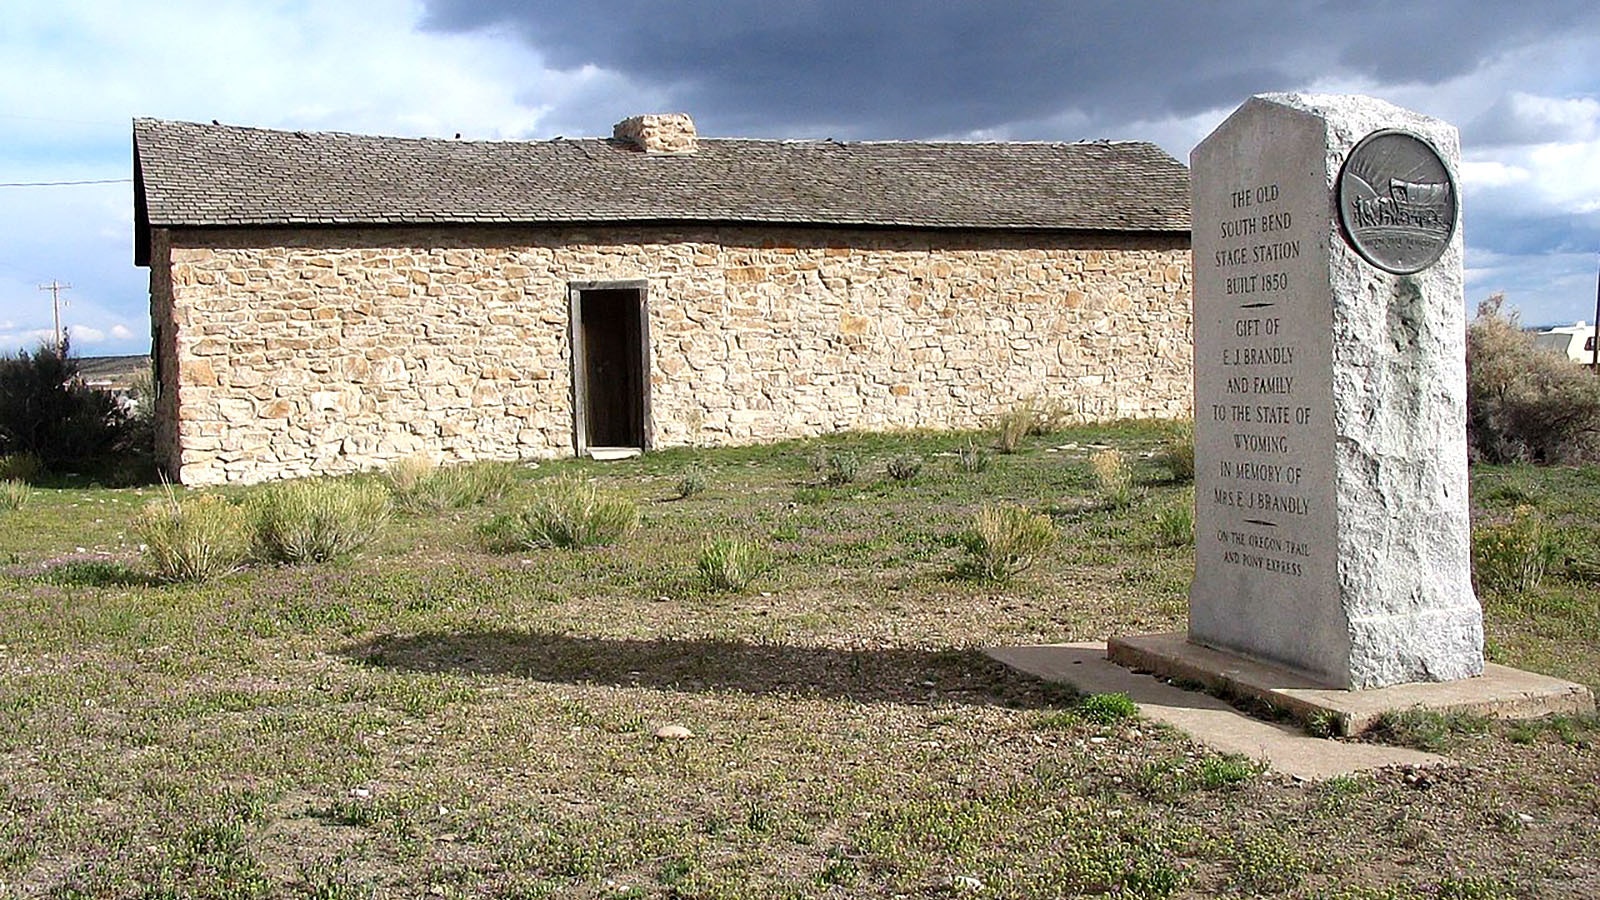 This stone marker shows the Granger Stage Station, first known as the Old South Bend Stage Station built in 1850, was on the Oregon Trail and a Pony Express stop.